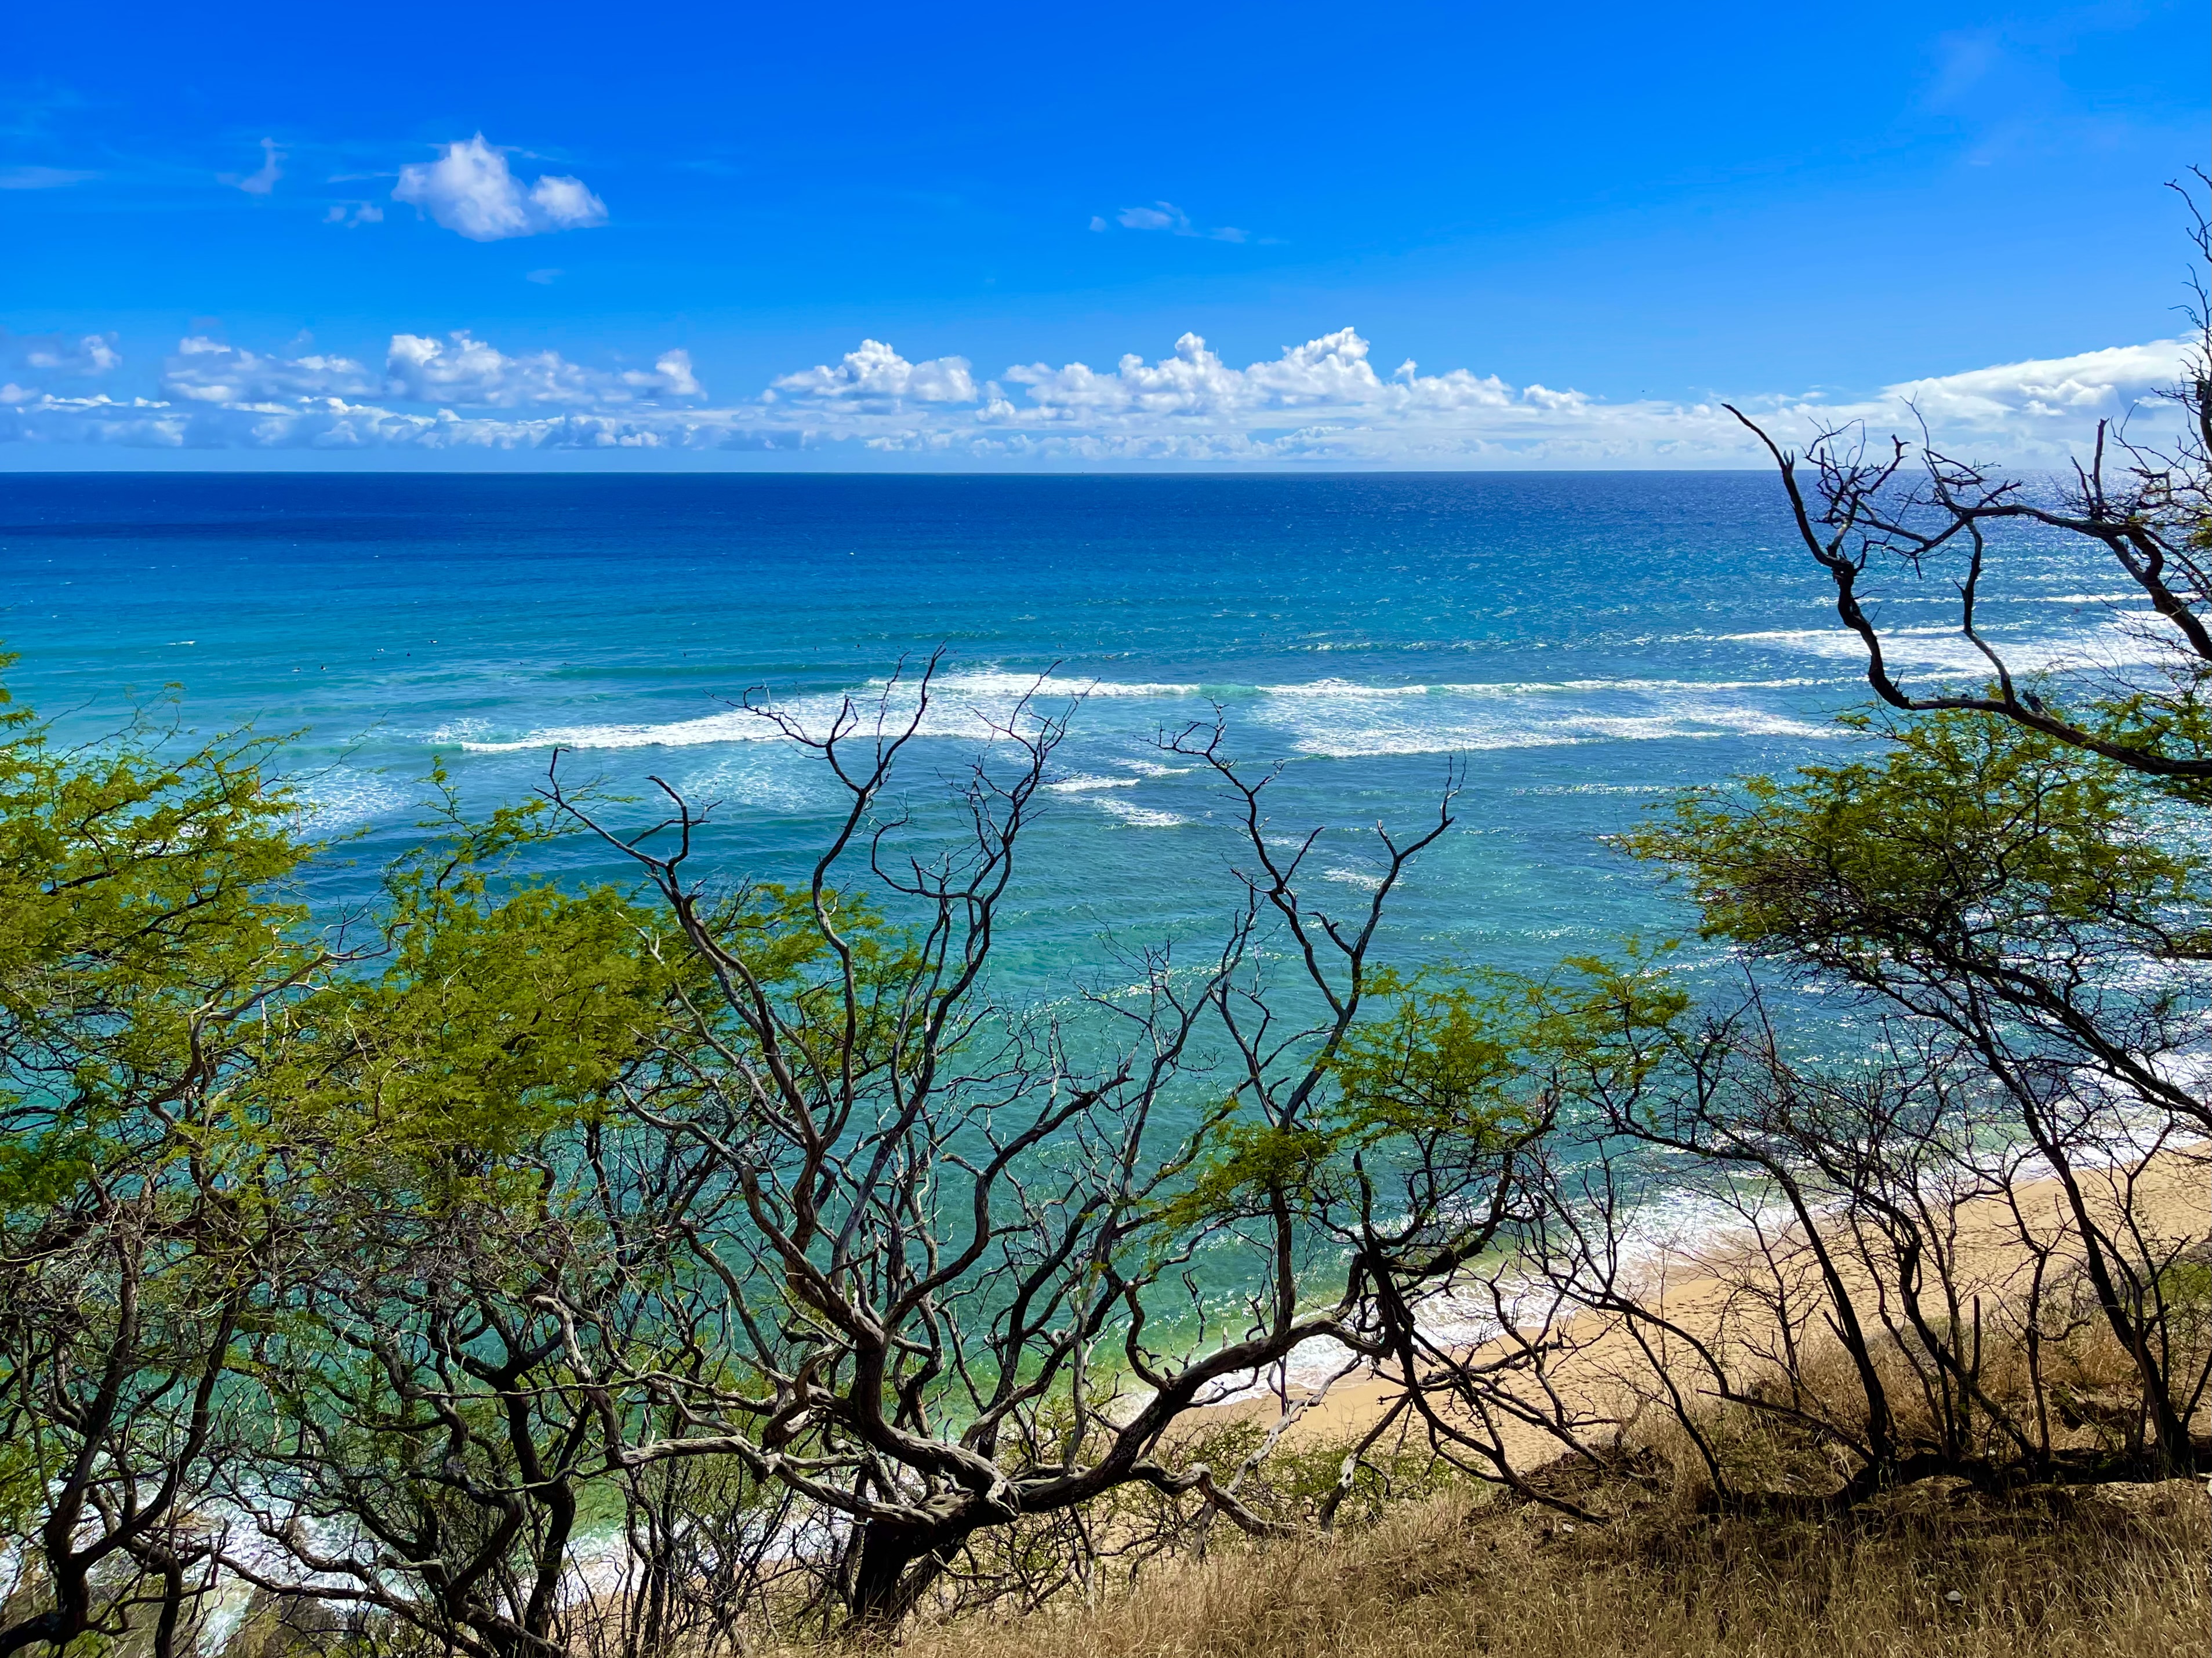 Clear blue ocean view with tree branches